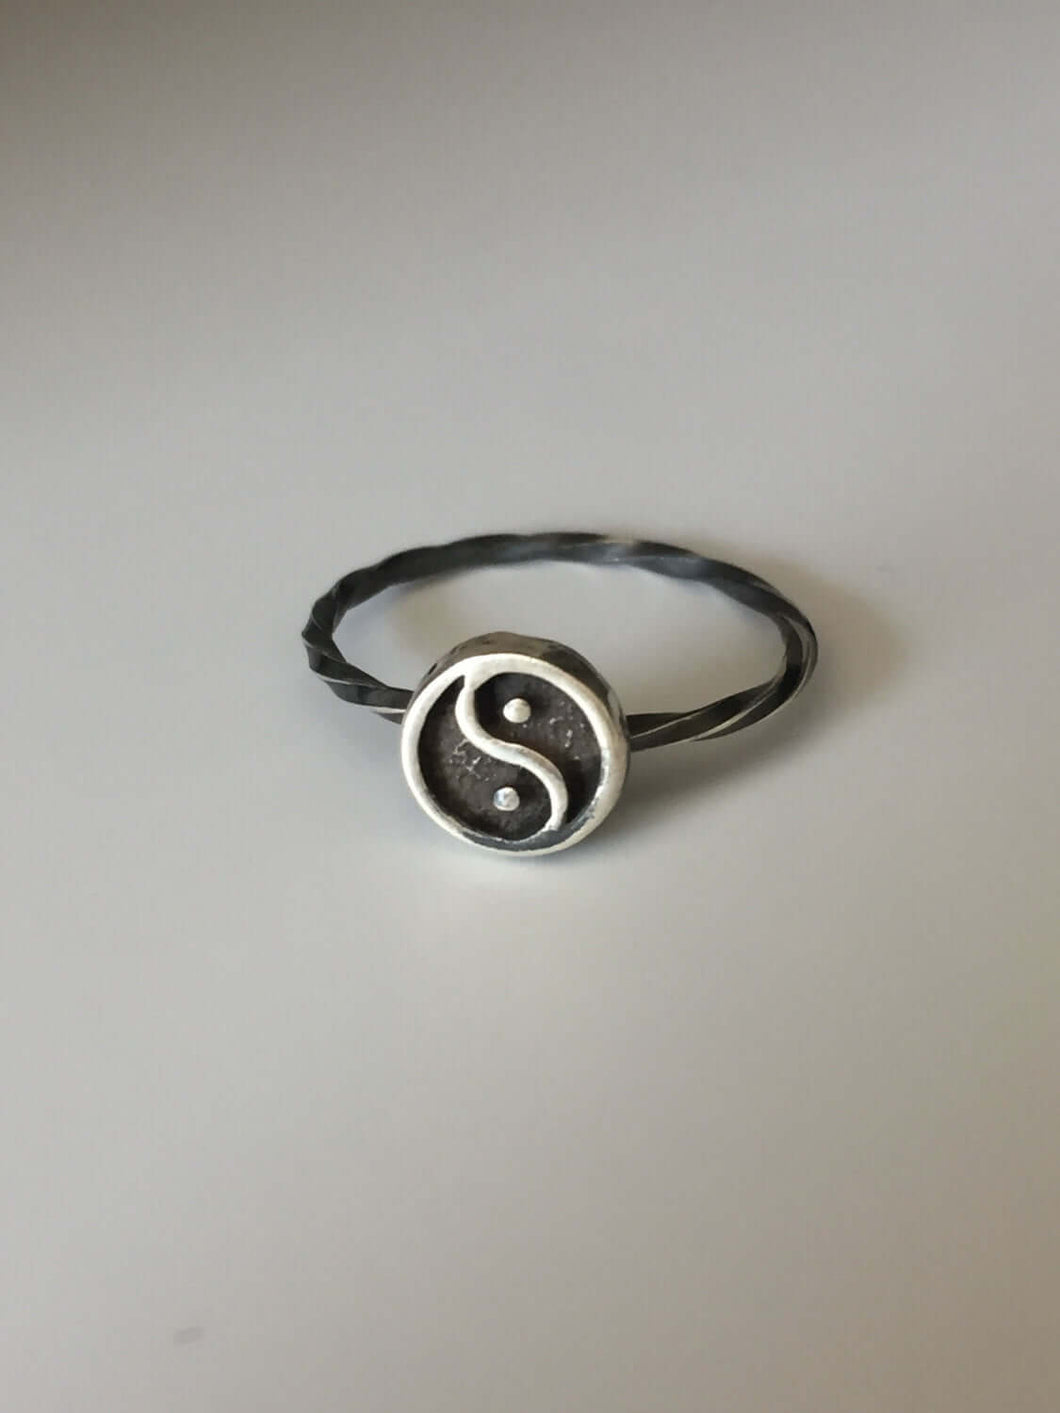 Yin/Yang Stacking Ring. Sterling silver stacker jewelry mix and match. Positive negative energy peace yoga jewelry.